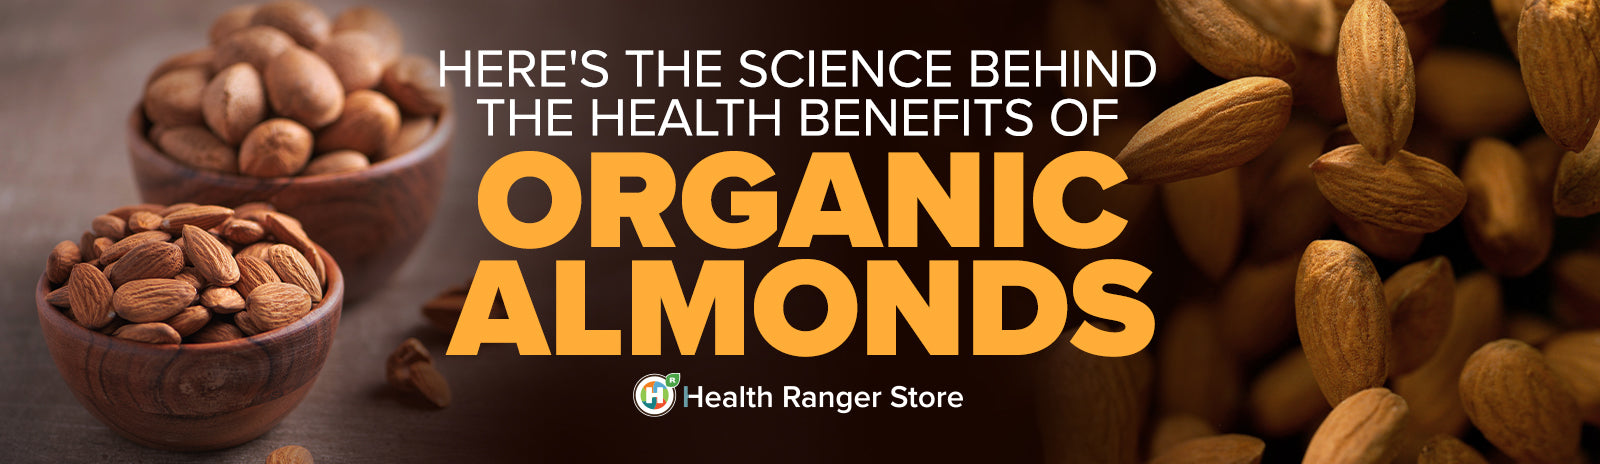 Here's the science behind the health benefits of organic almonds